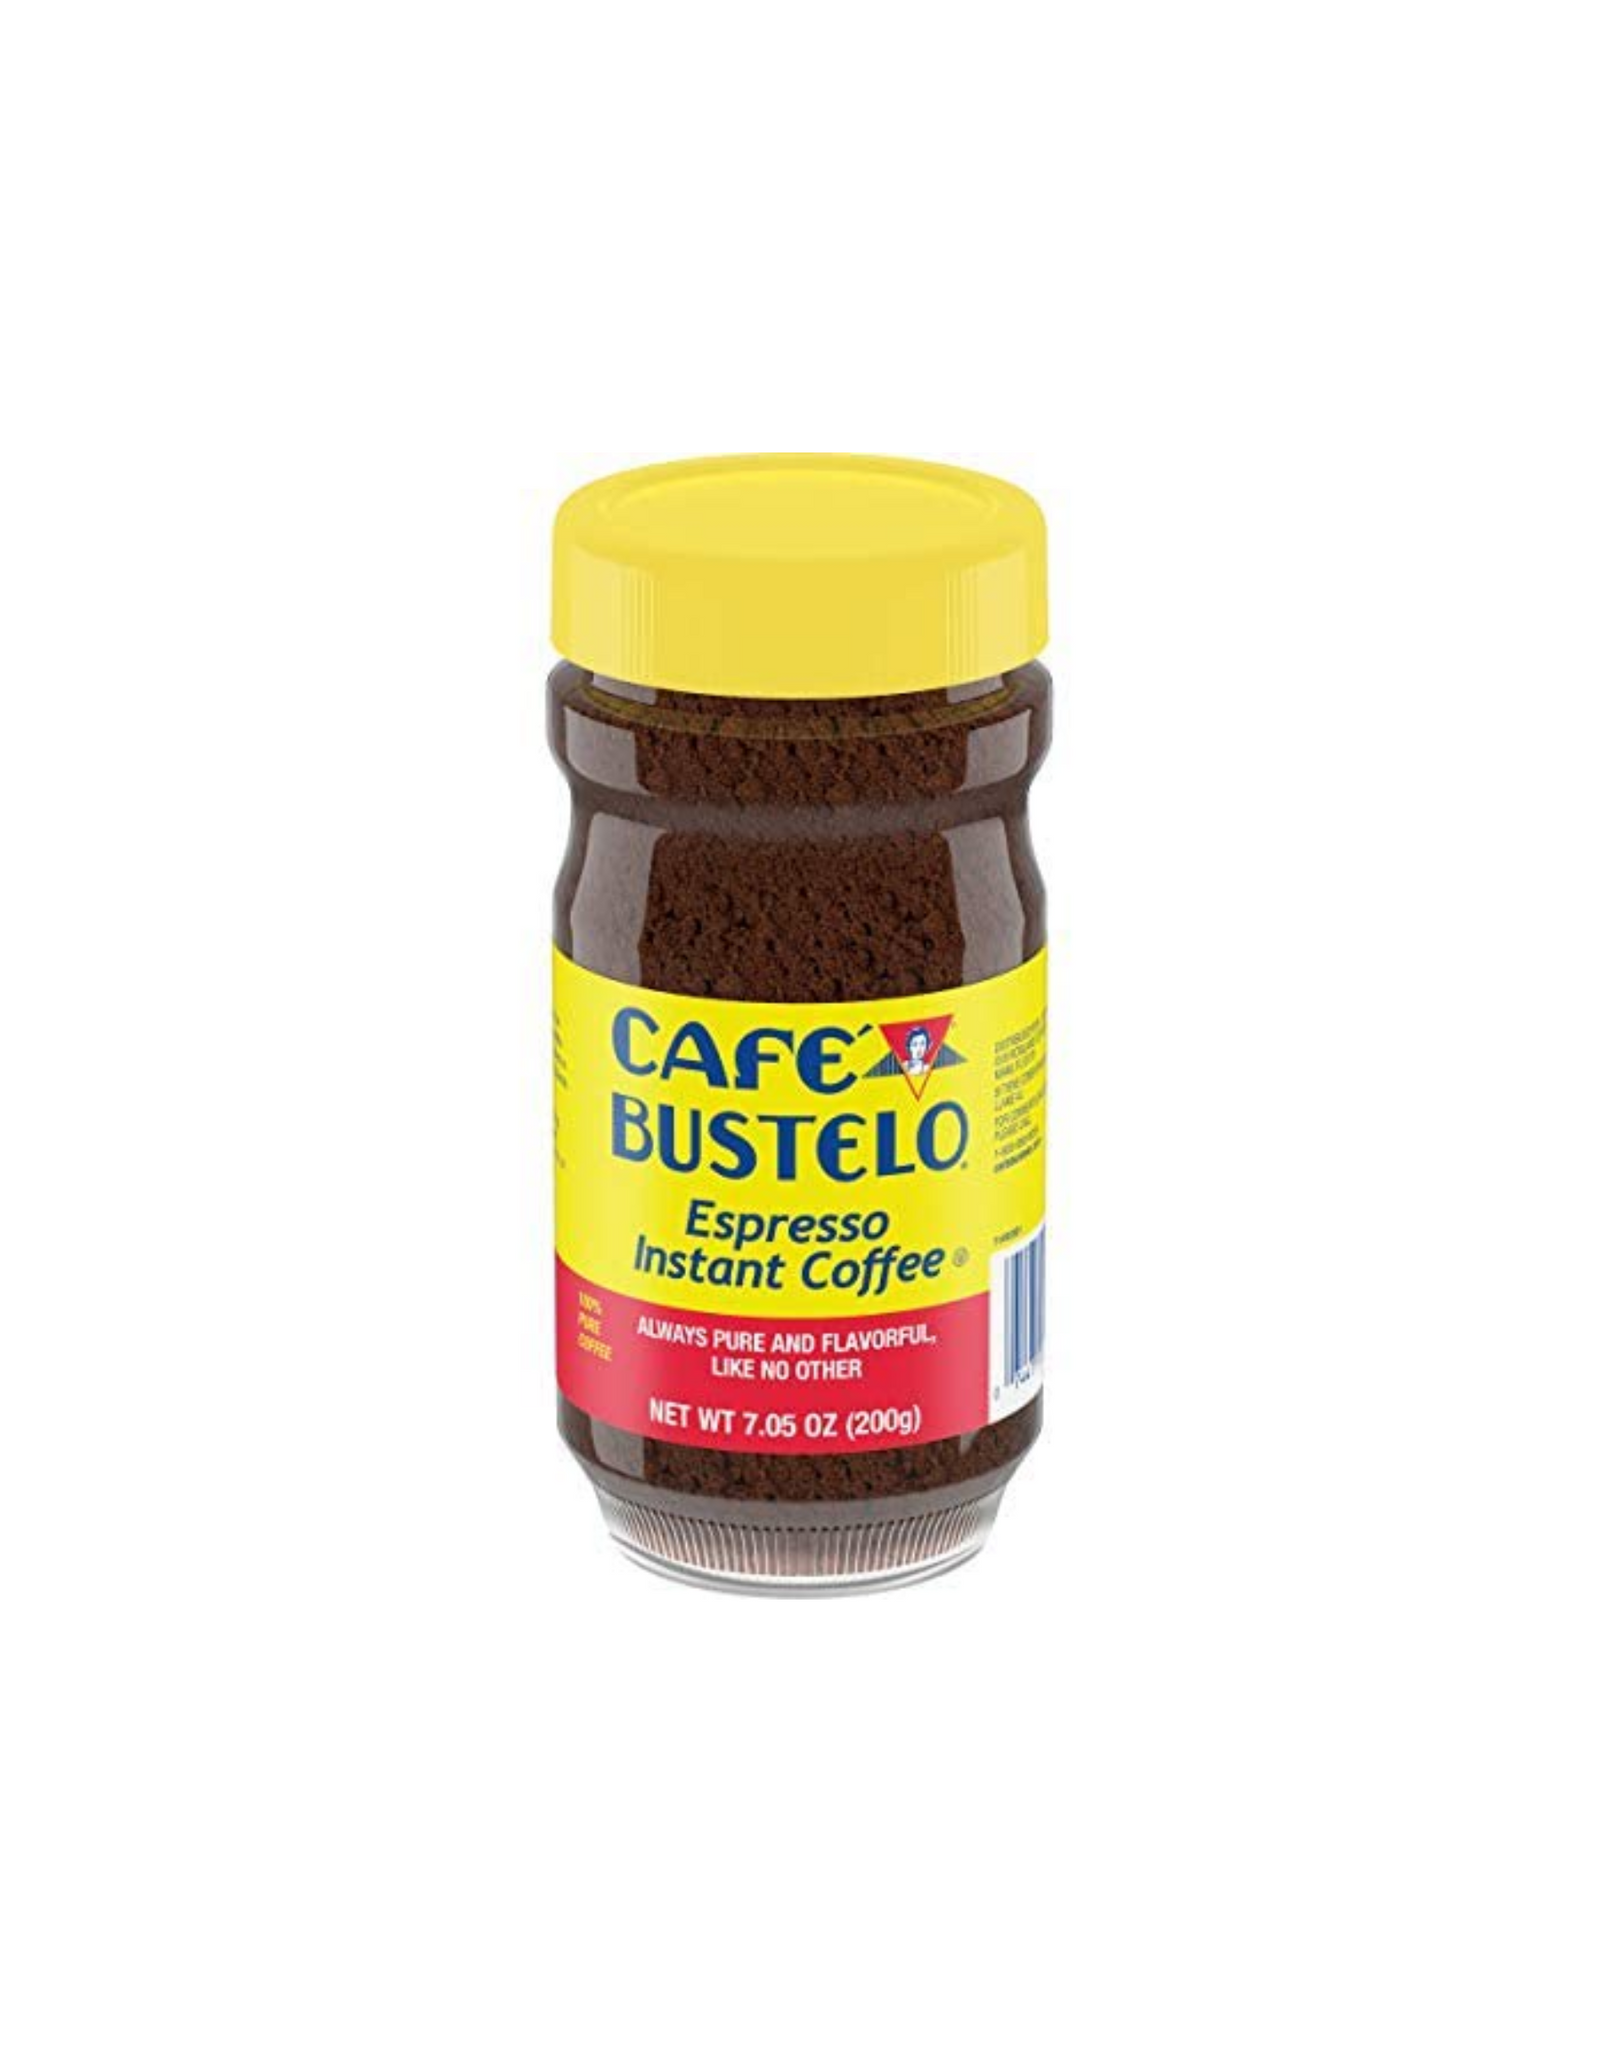 Bustelo Instant Coffee. Large 7.05 oz glass jar. (Pack of 2)